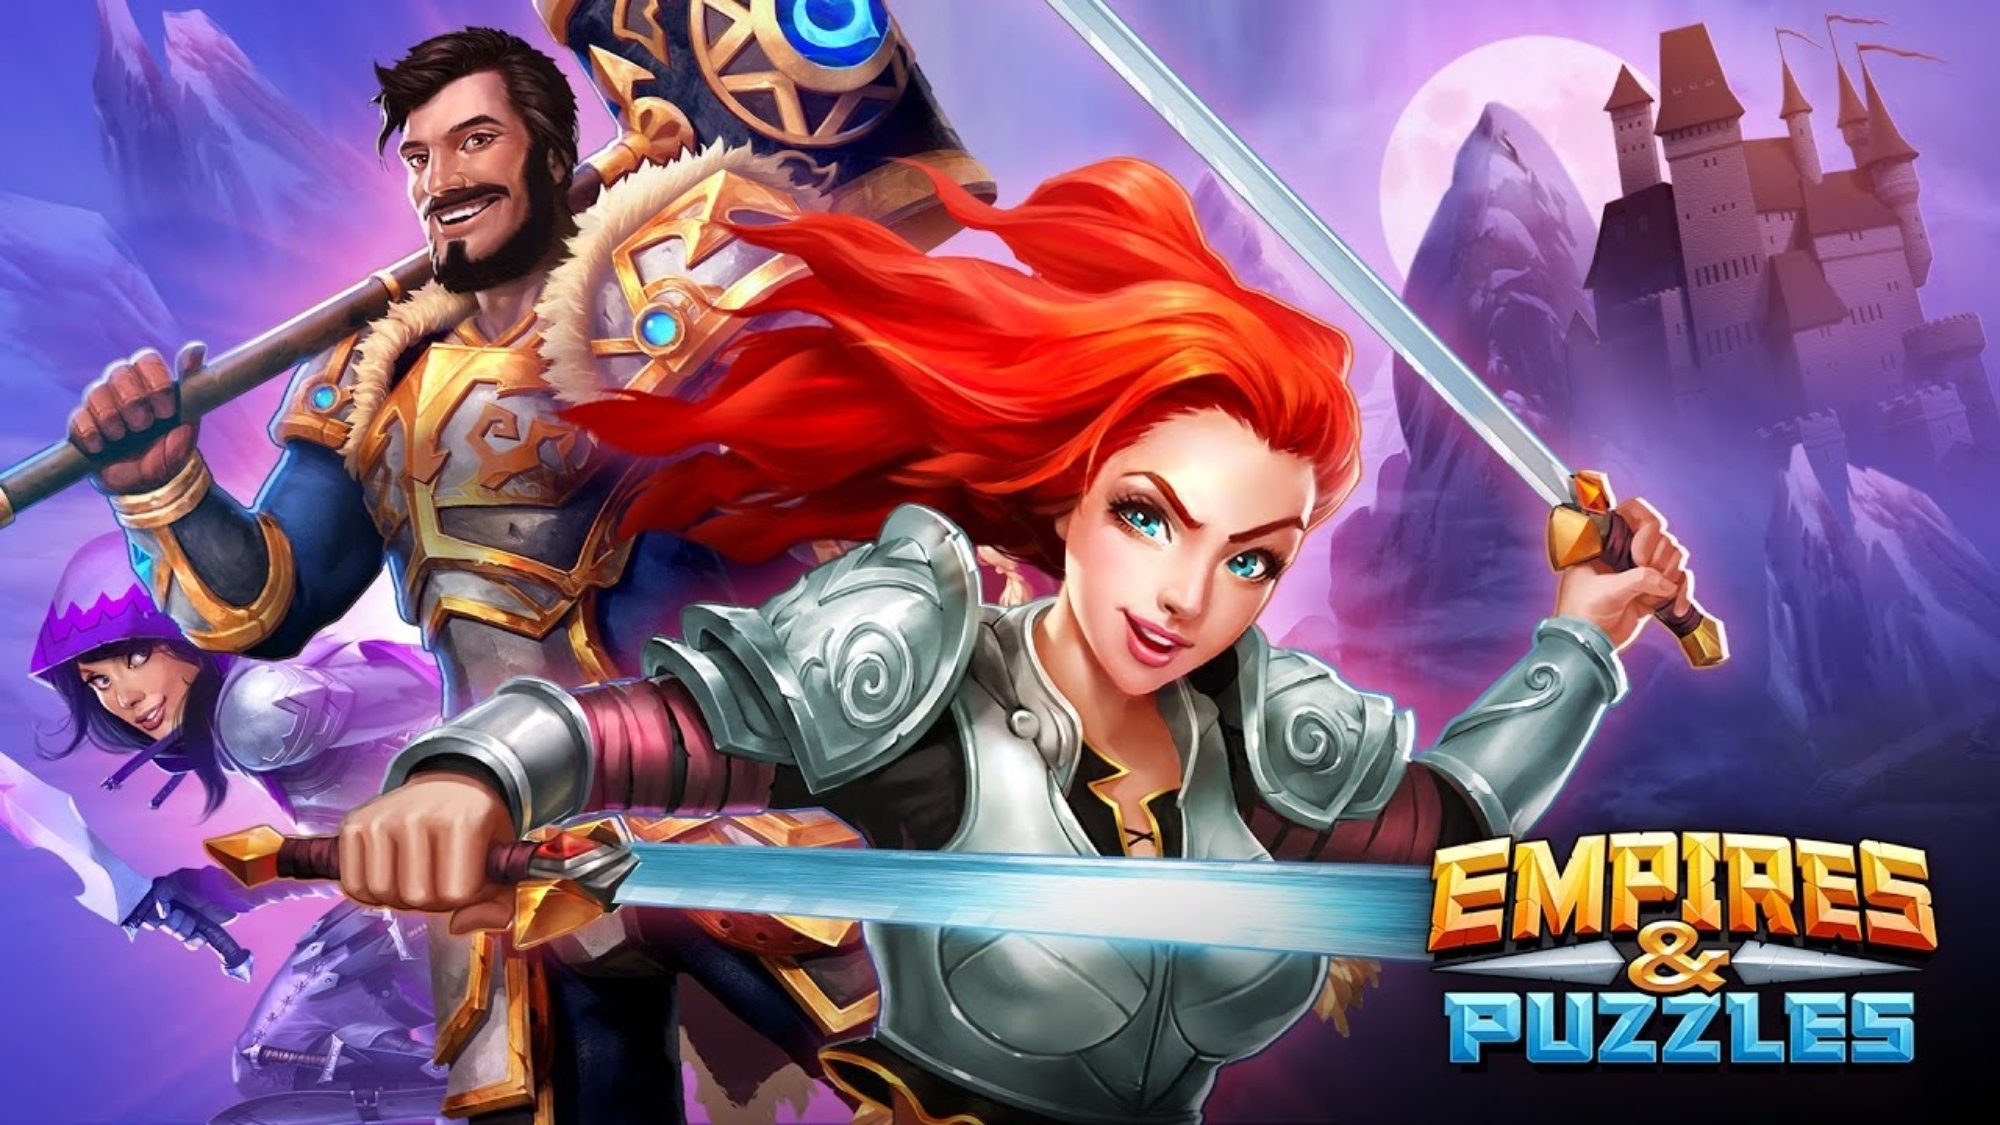 Empires and Puzzles, Small giant games, Zynga, Big deal, 2000x1130 HD Desktop